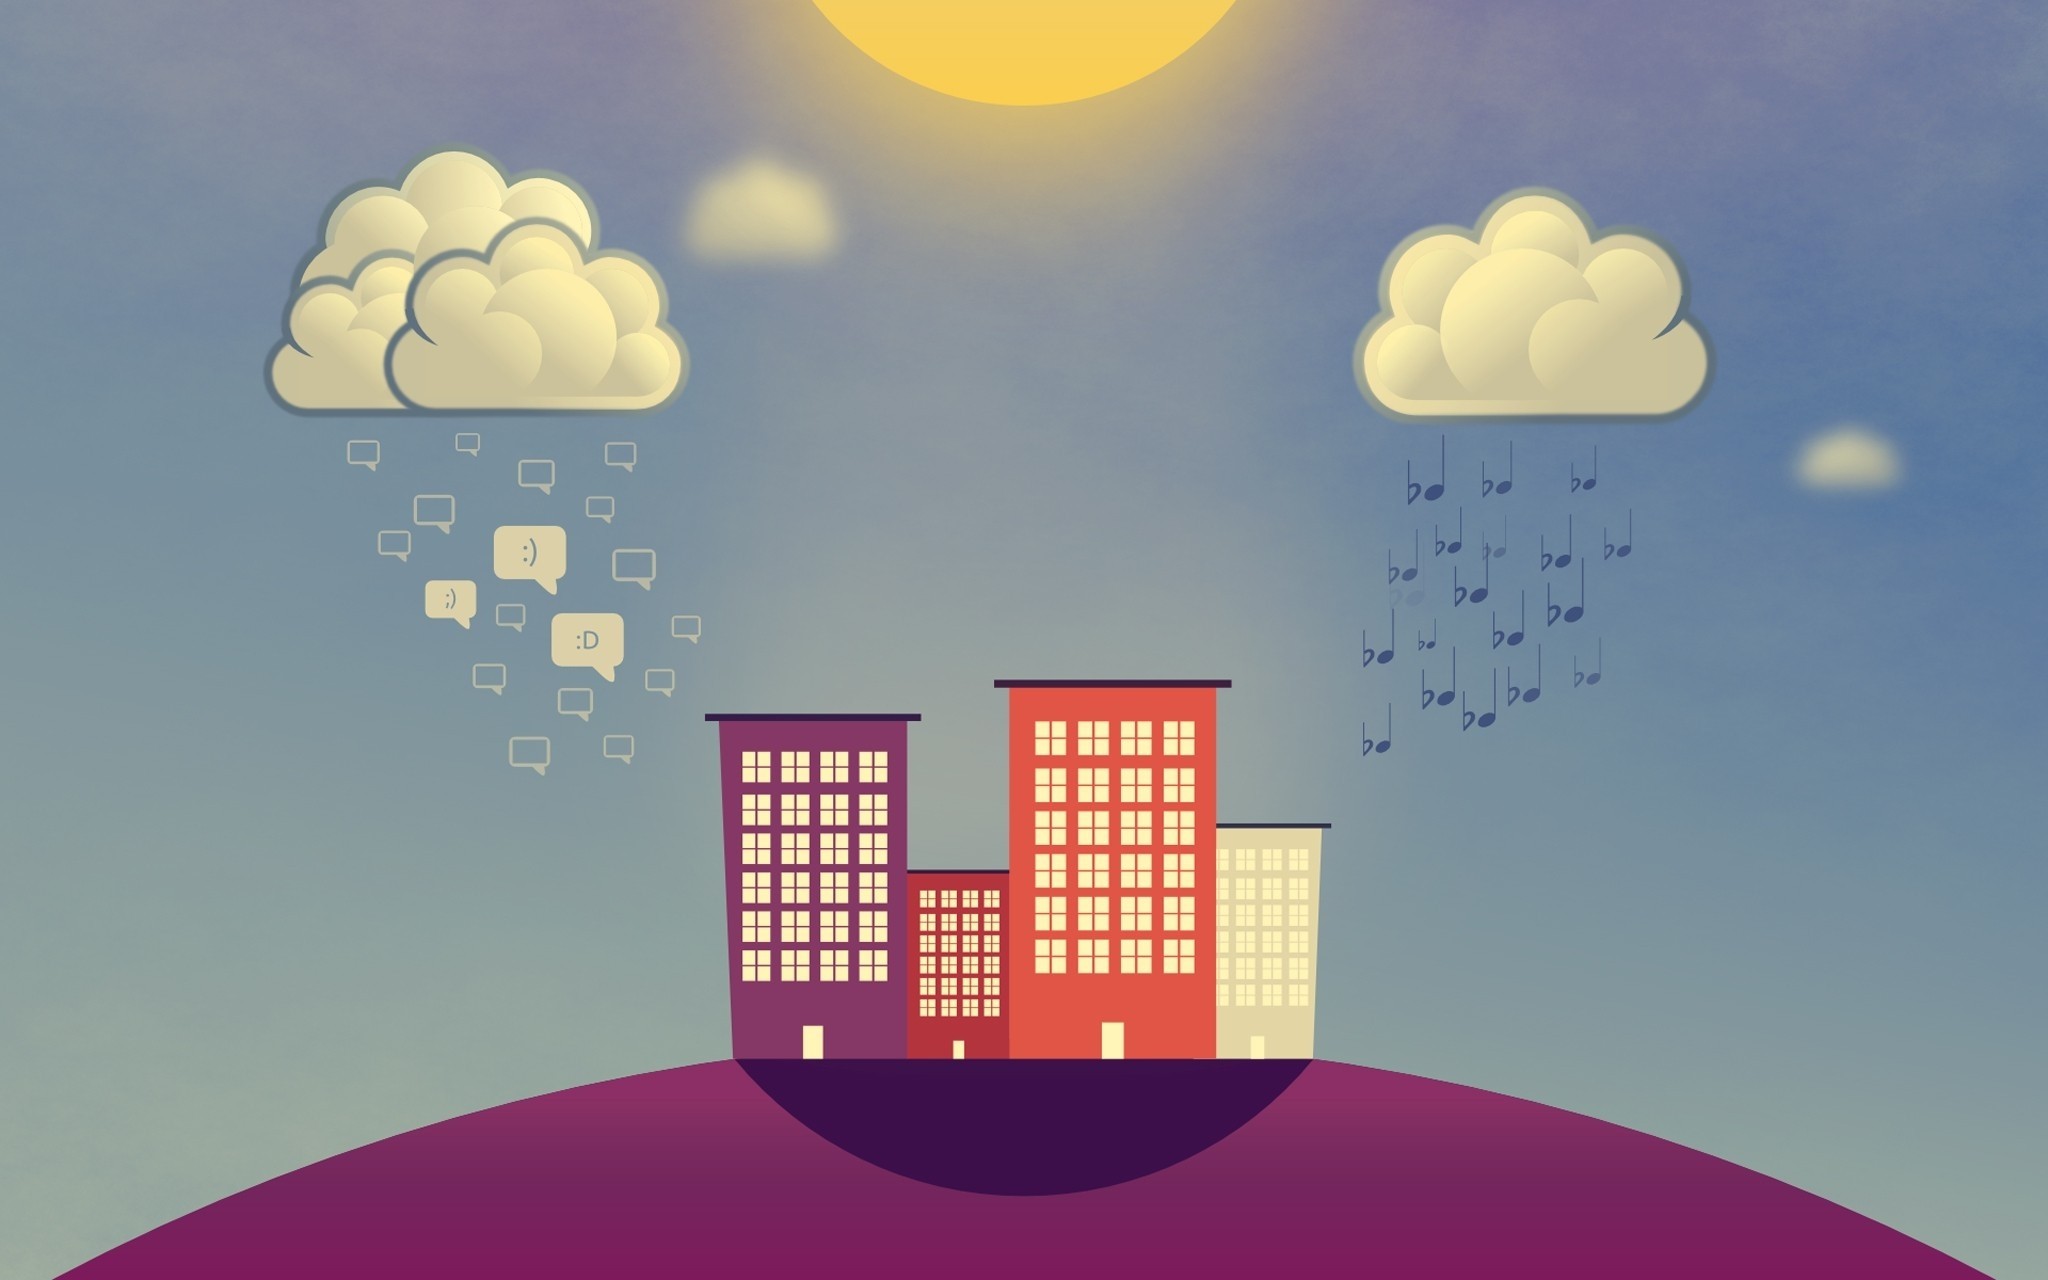 1920x1080 Background music, rain, clouds, vector, building, notes, smilies, smiles